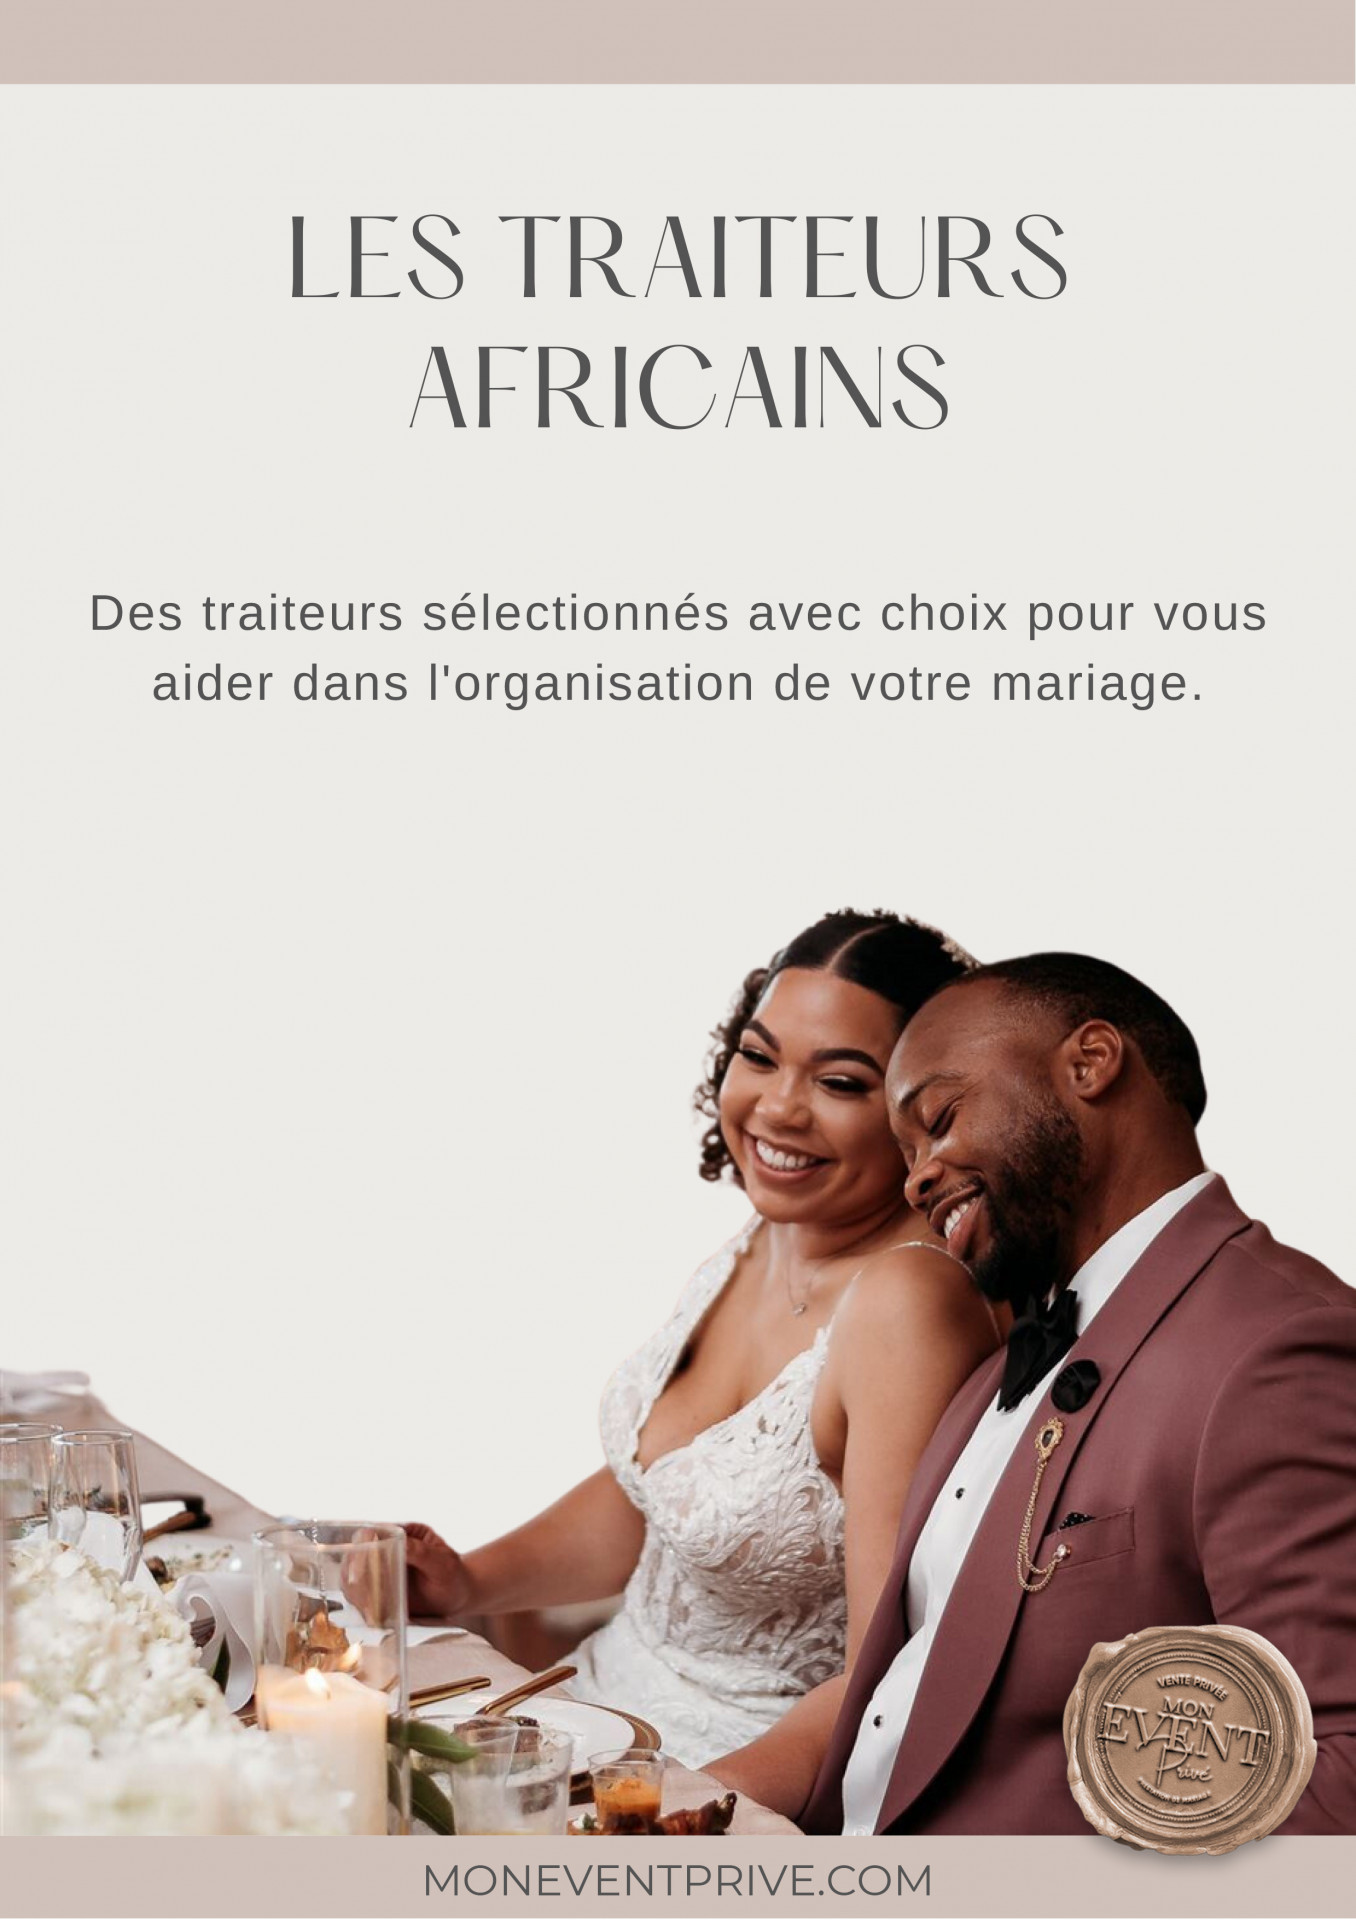 Ebook-traiteurs-africains-mariage-evenement-prive-scaled